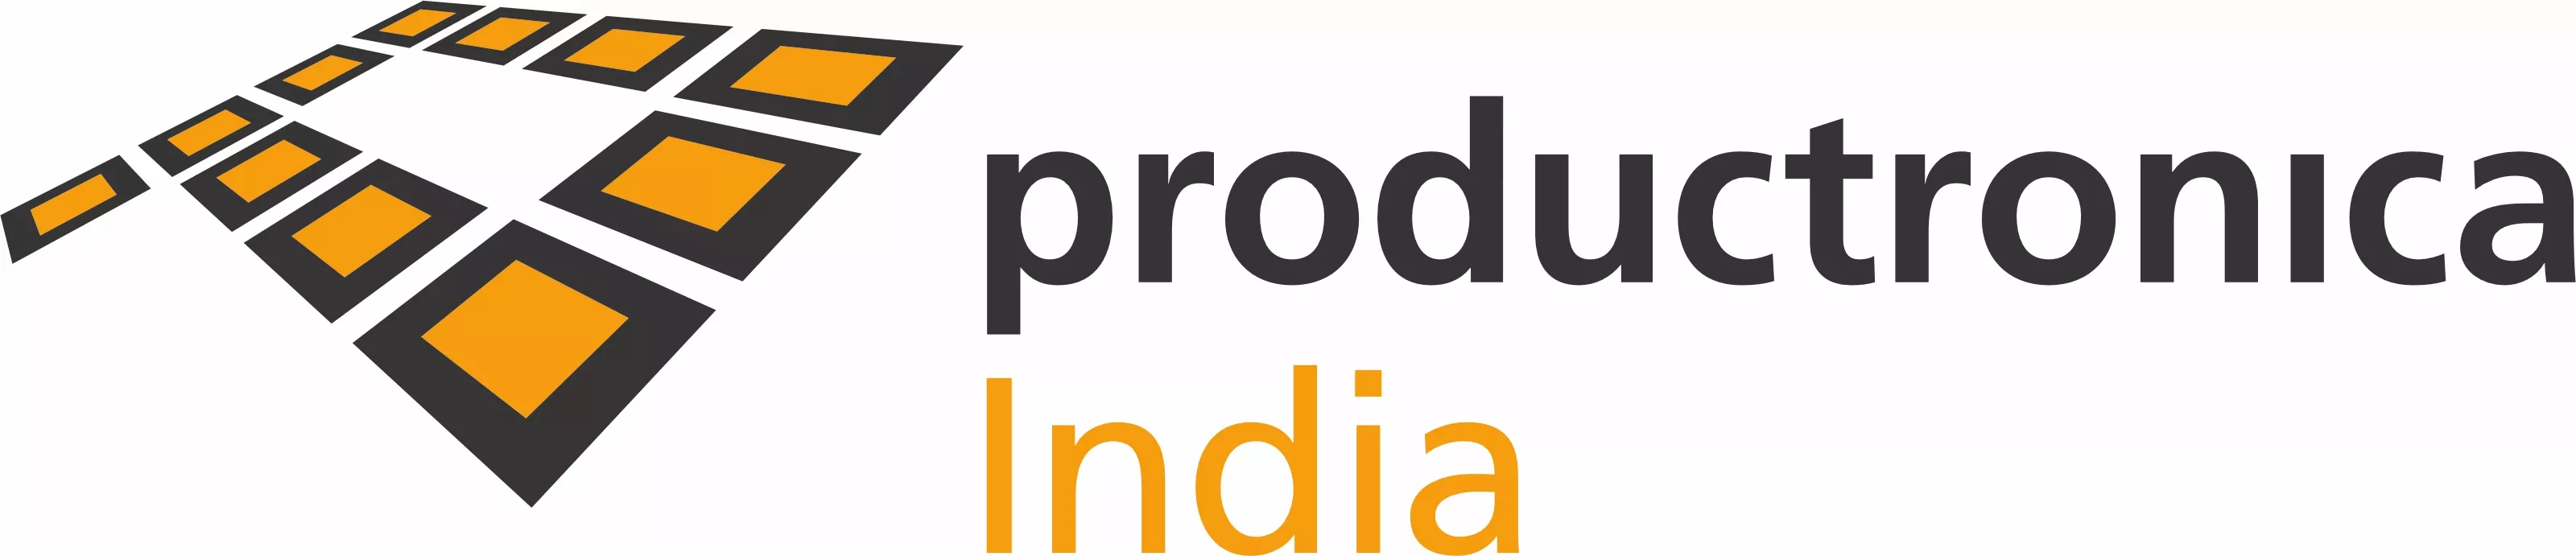 productronica_india